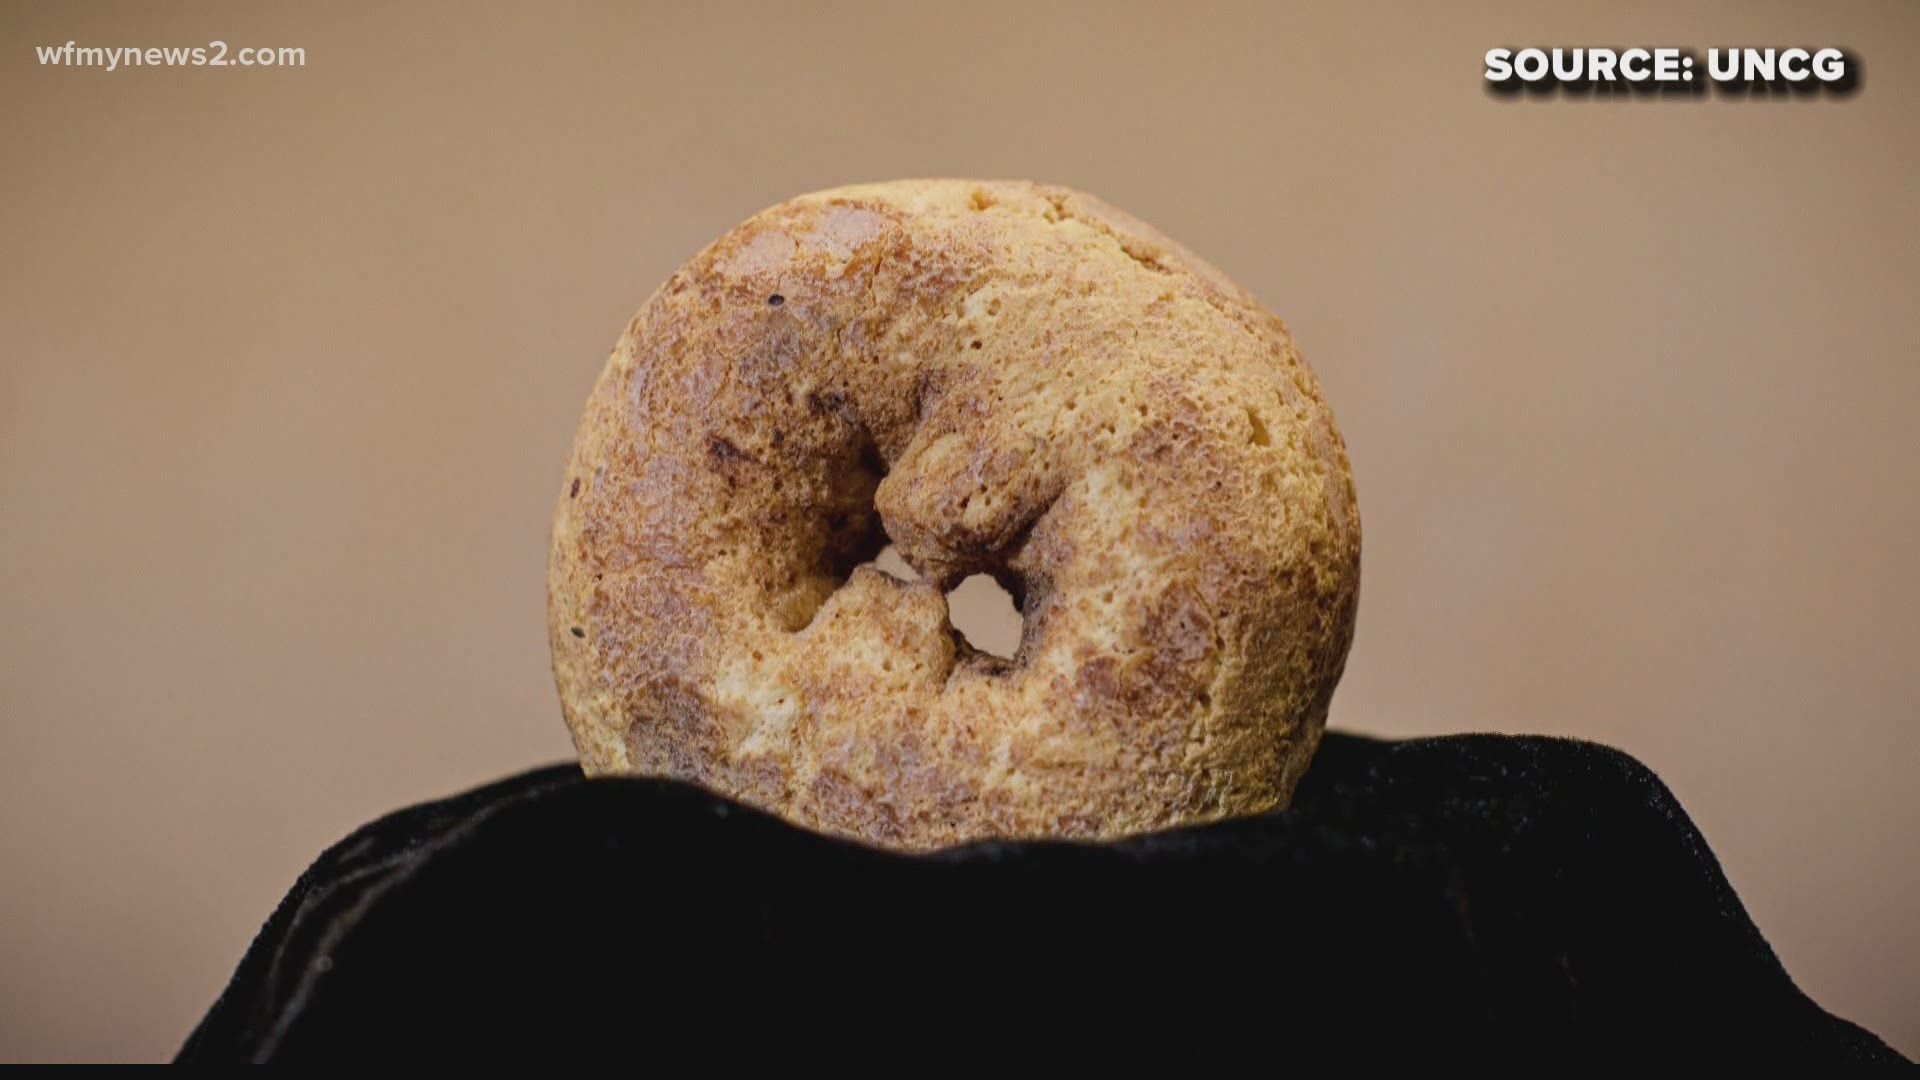 UNCG is partnering with Dunkin’ Donuts to celebrate a 40-year-old legendary donut left behind after a library staff orientation.